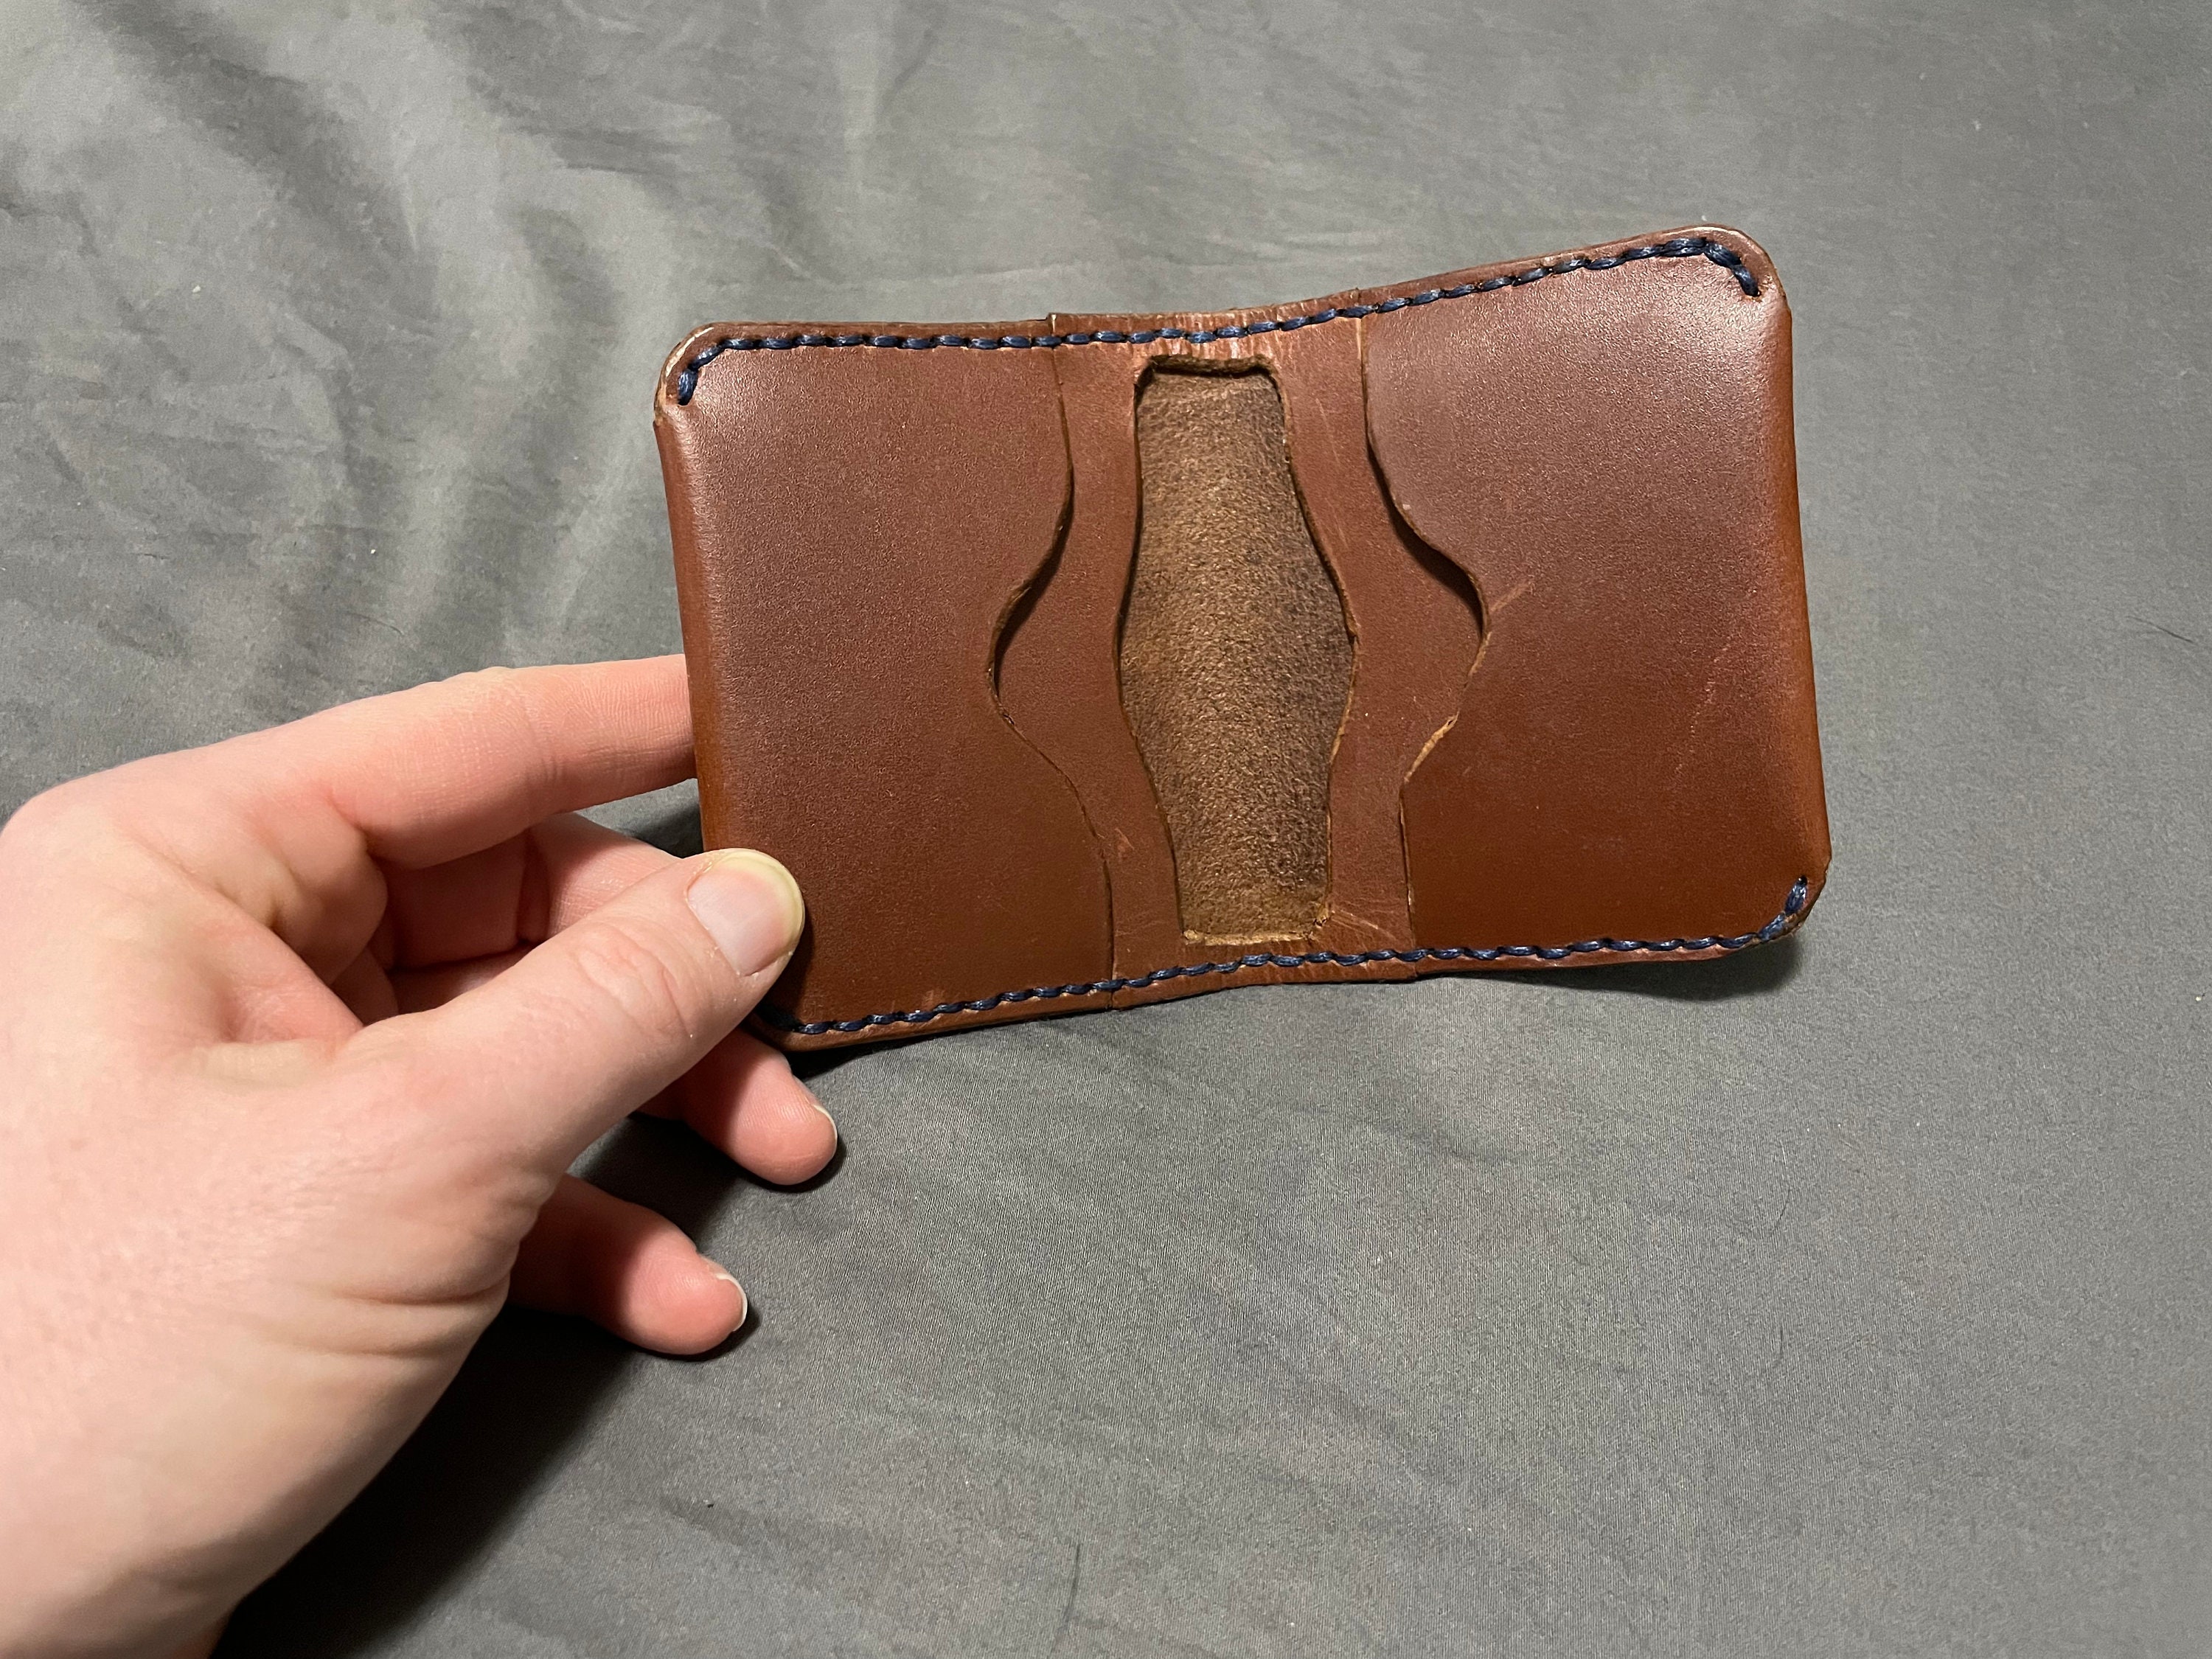 Vendôme Card Holder - Wallets and Small Leather Goods